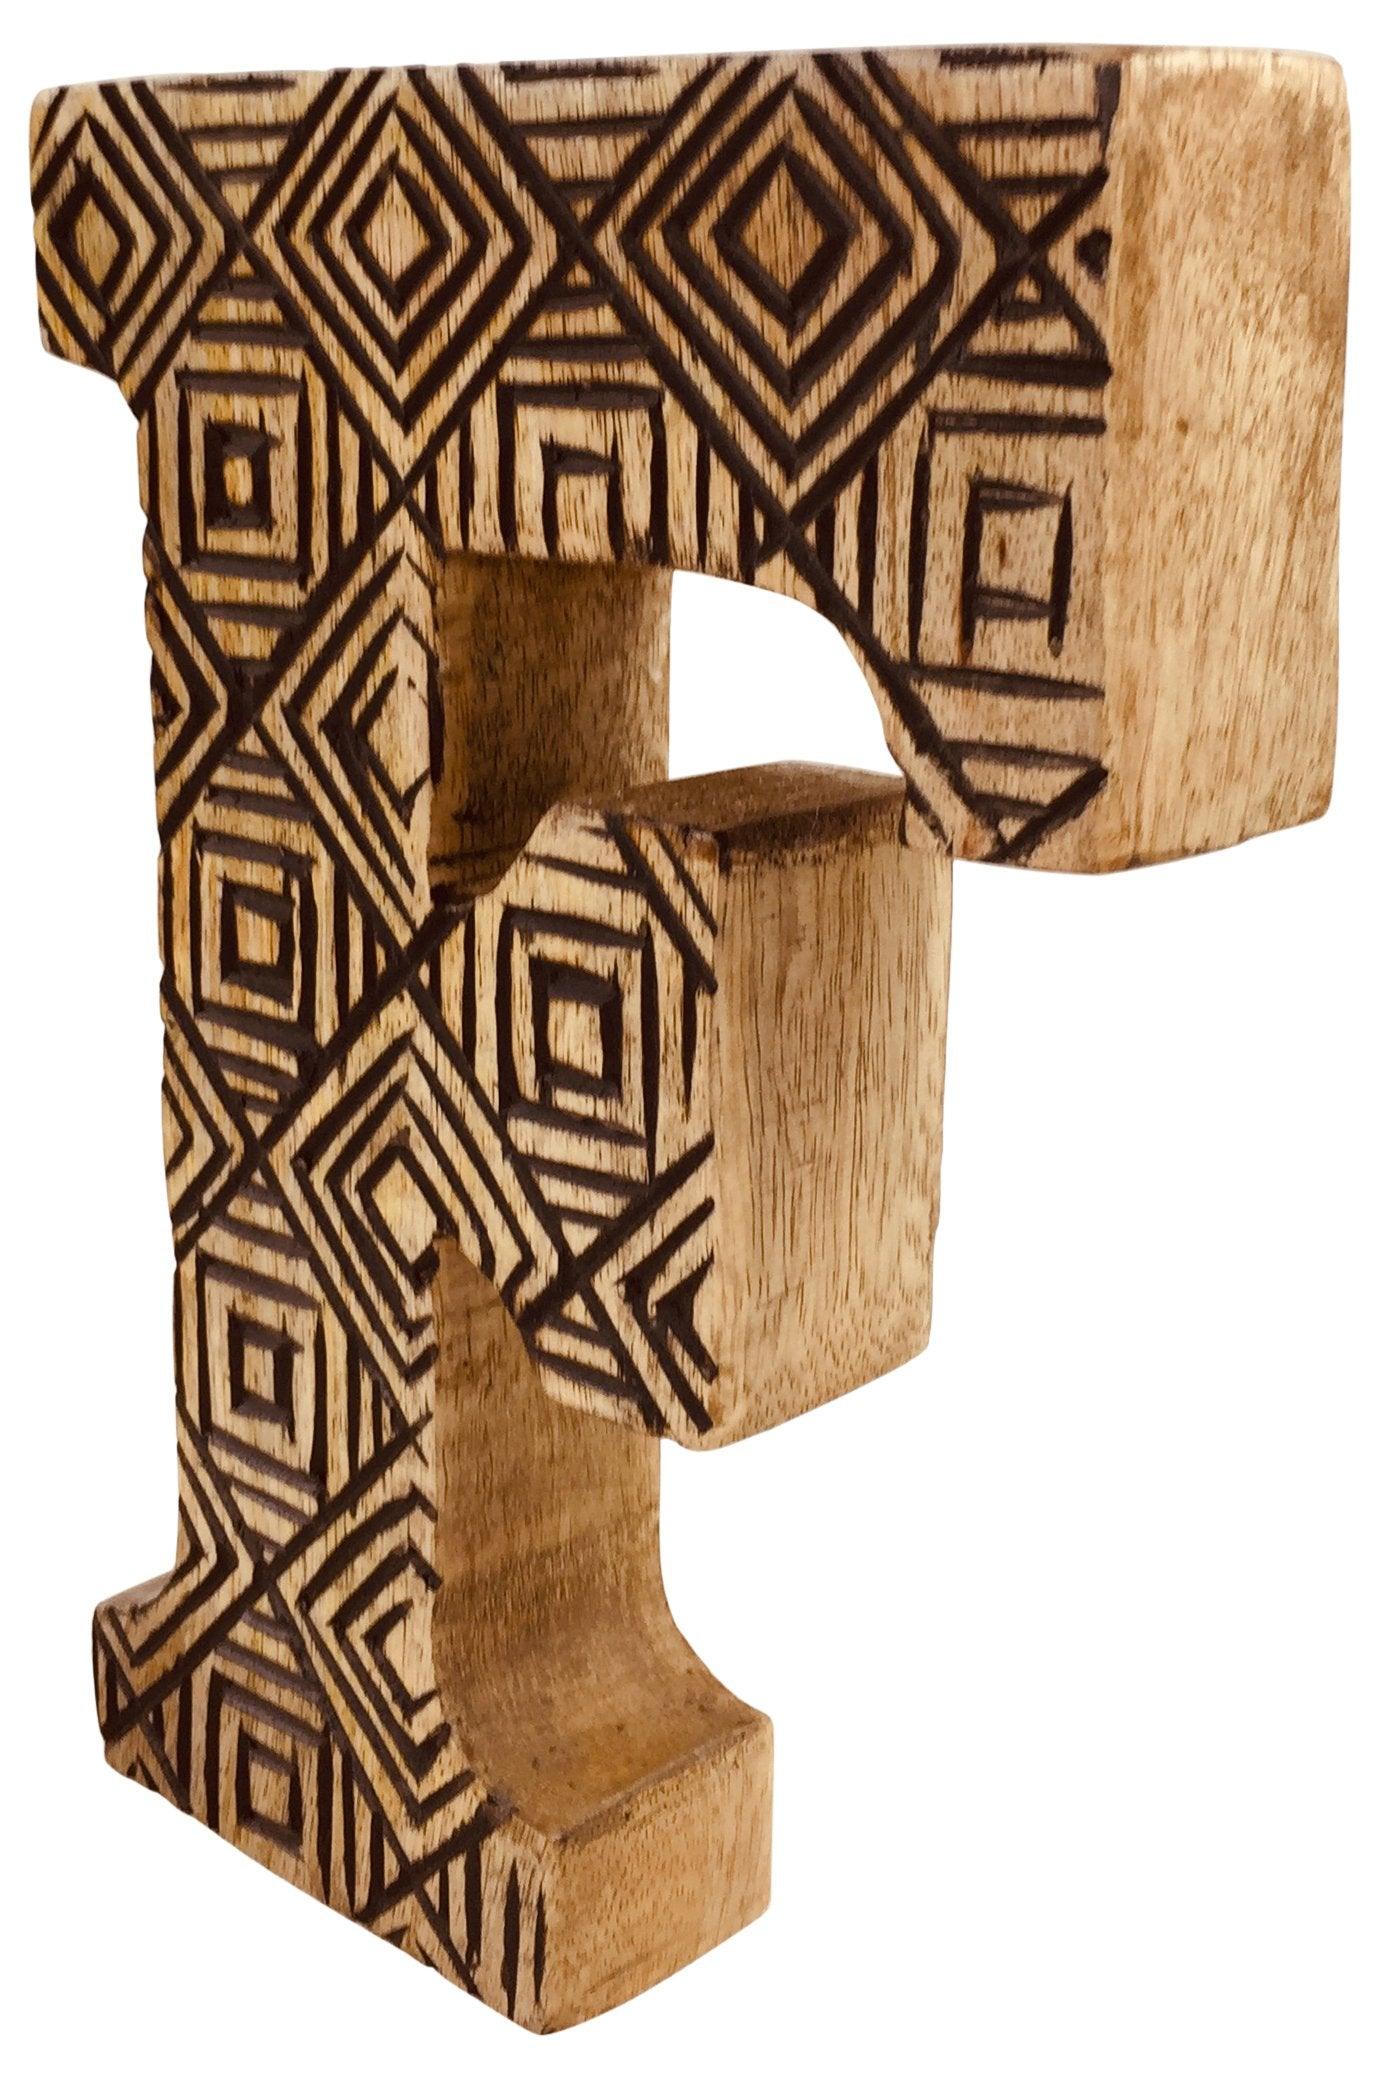 View Hand Carved Wooden Geometric Letter F information